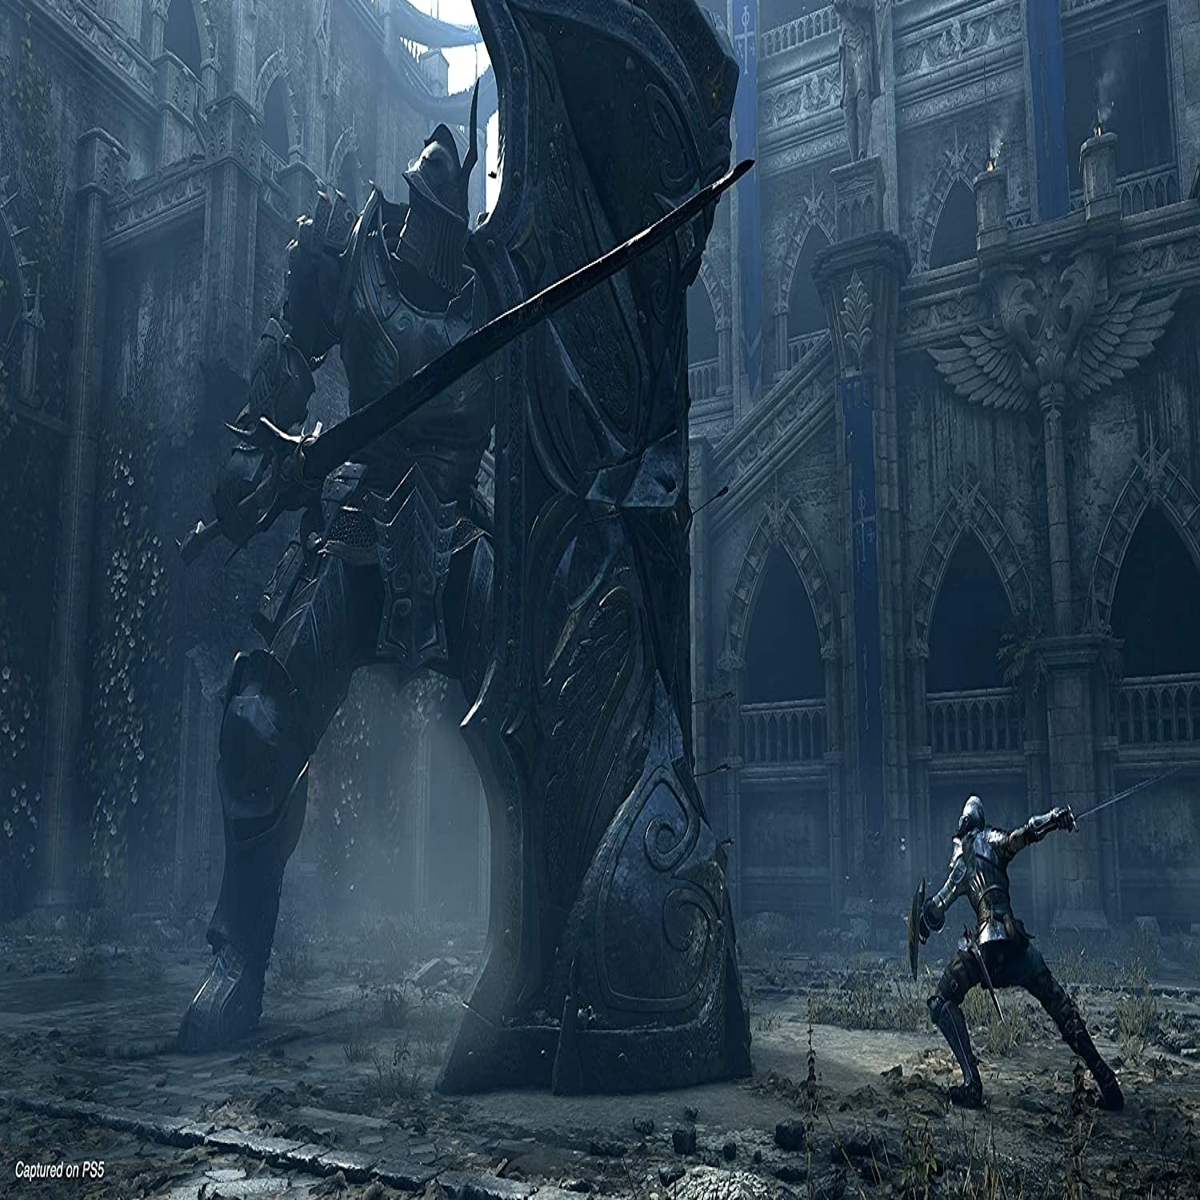 Demon's Souls remake is down to its lowest price ever at B&H Photo